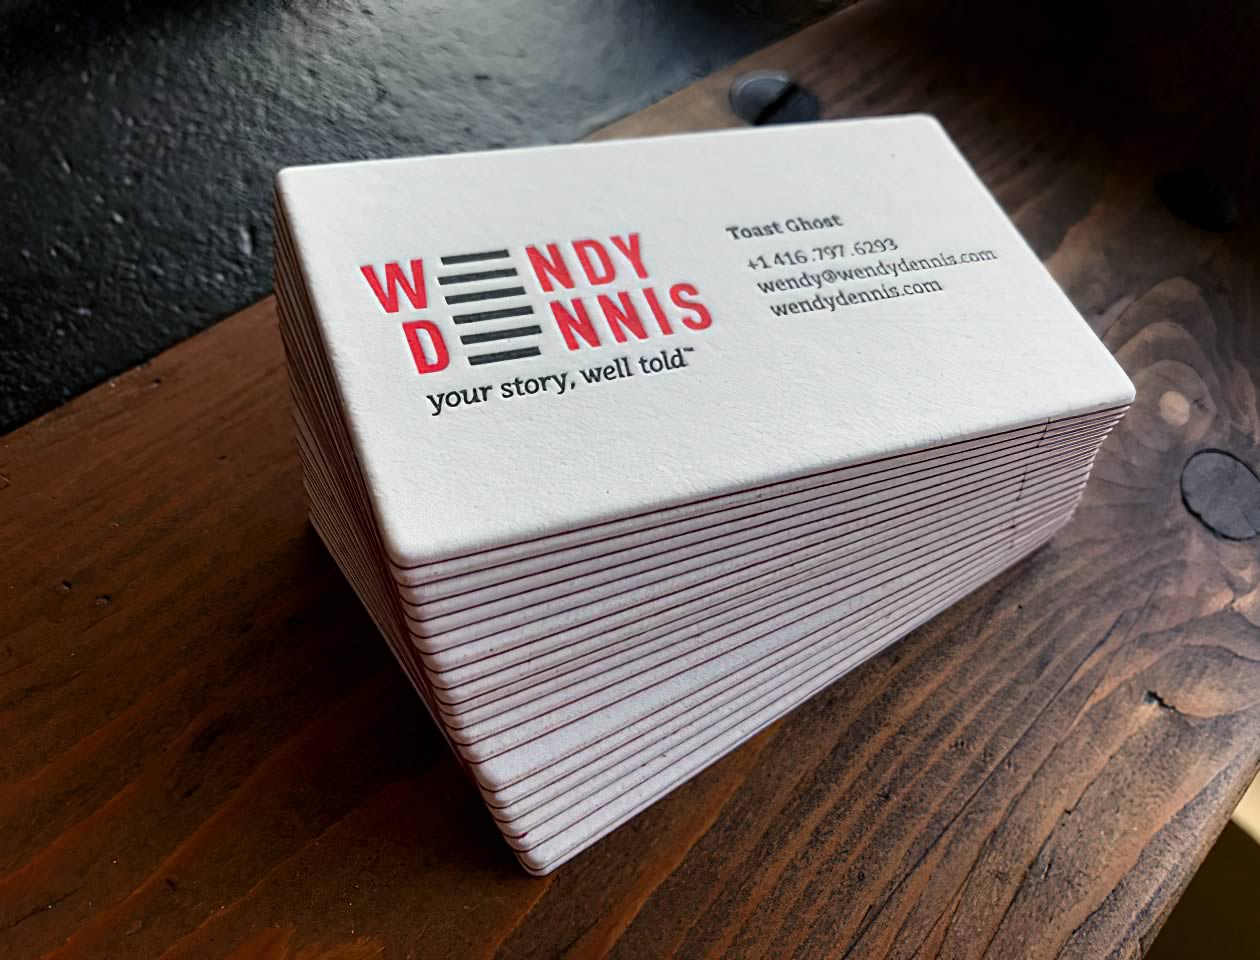 Photograph of Wendy Dennis’ business card